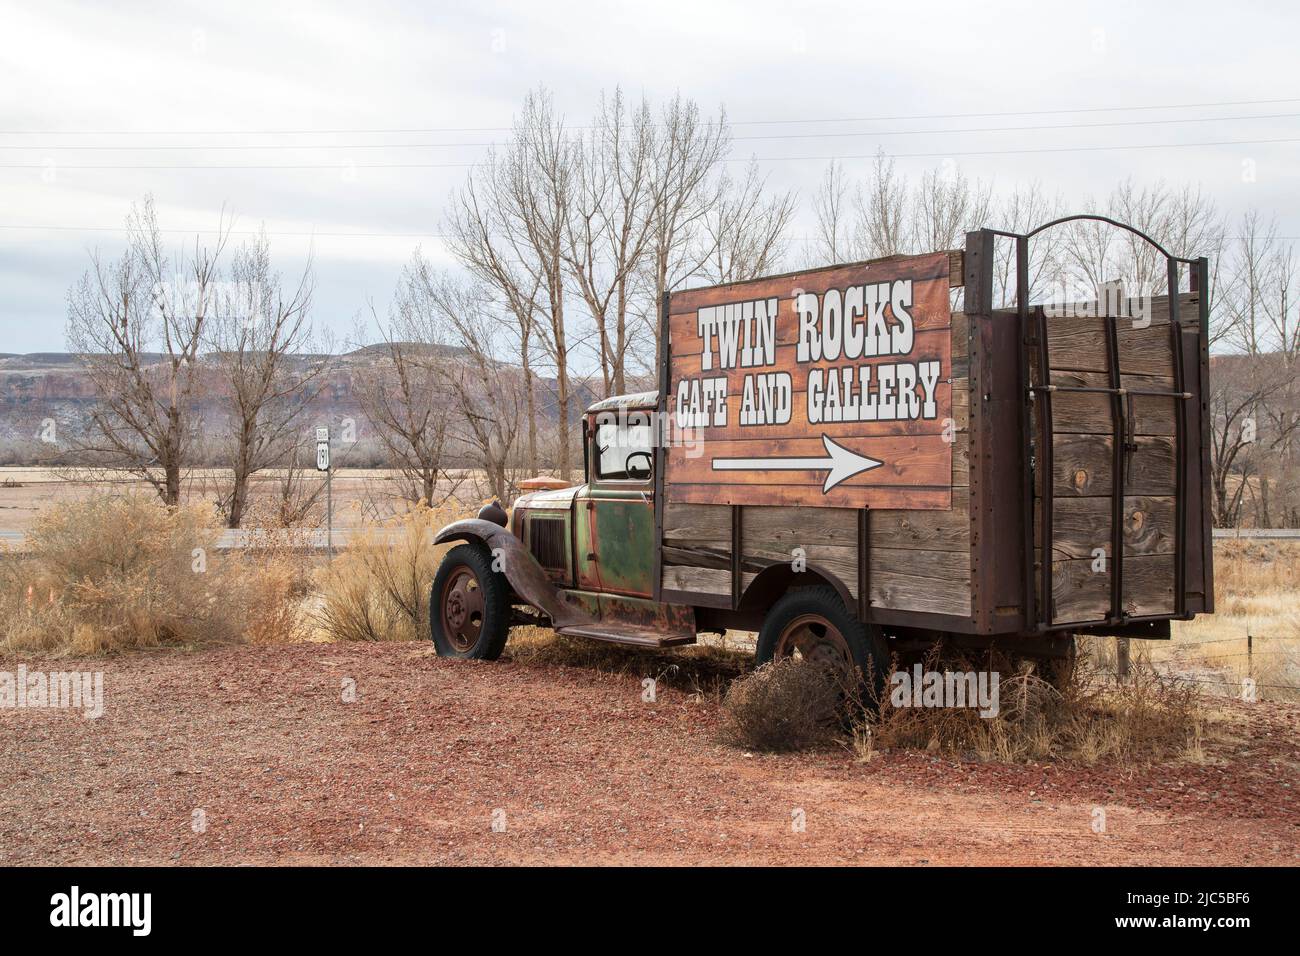 USA, Southwest, Utah, Bluff, Old Truck at Twin Rocks *** Légende locale *** USA, Southwest, Utah, Bluff, 50 Staes of gey, Old Truck, tarvel, Road tri Banque D'Images